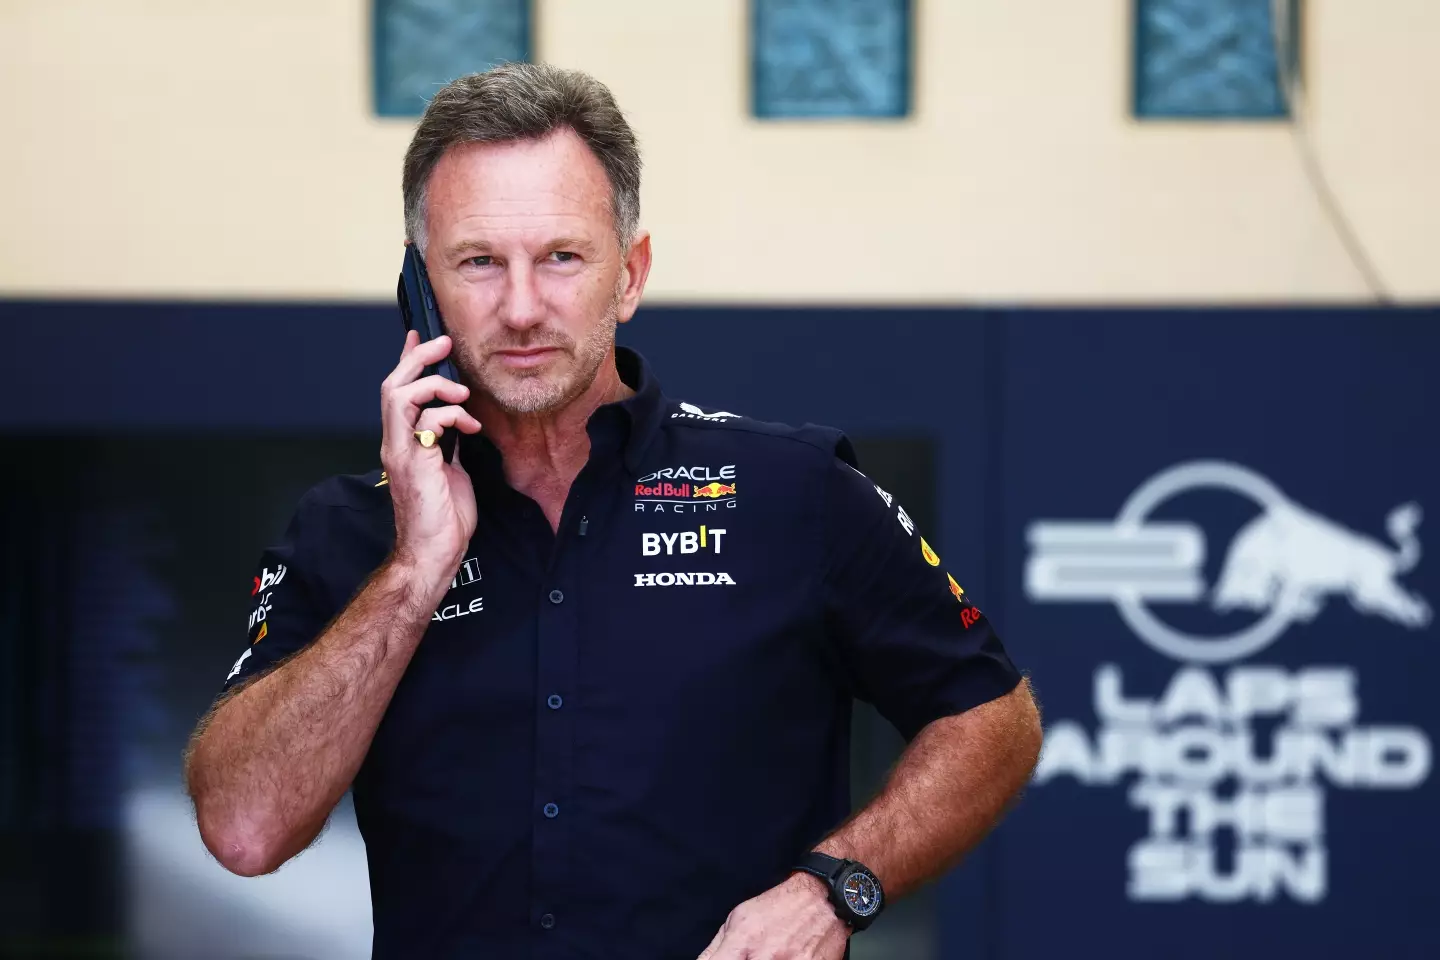 Christian Horner hit back at a question about his accuser.